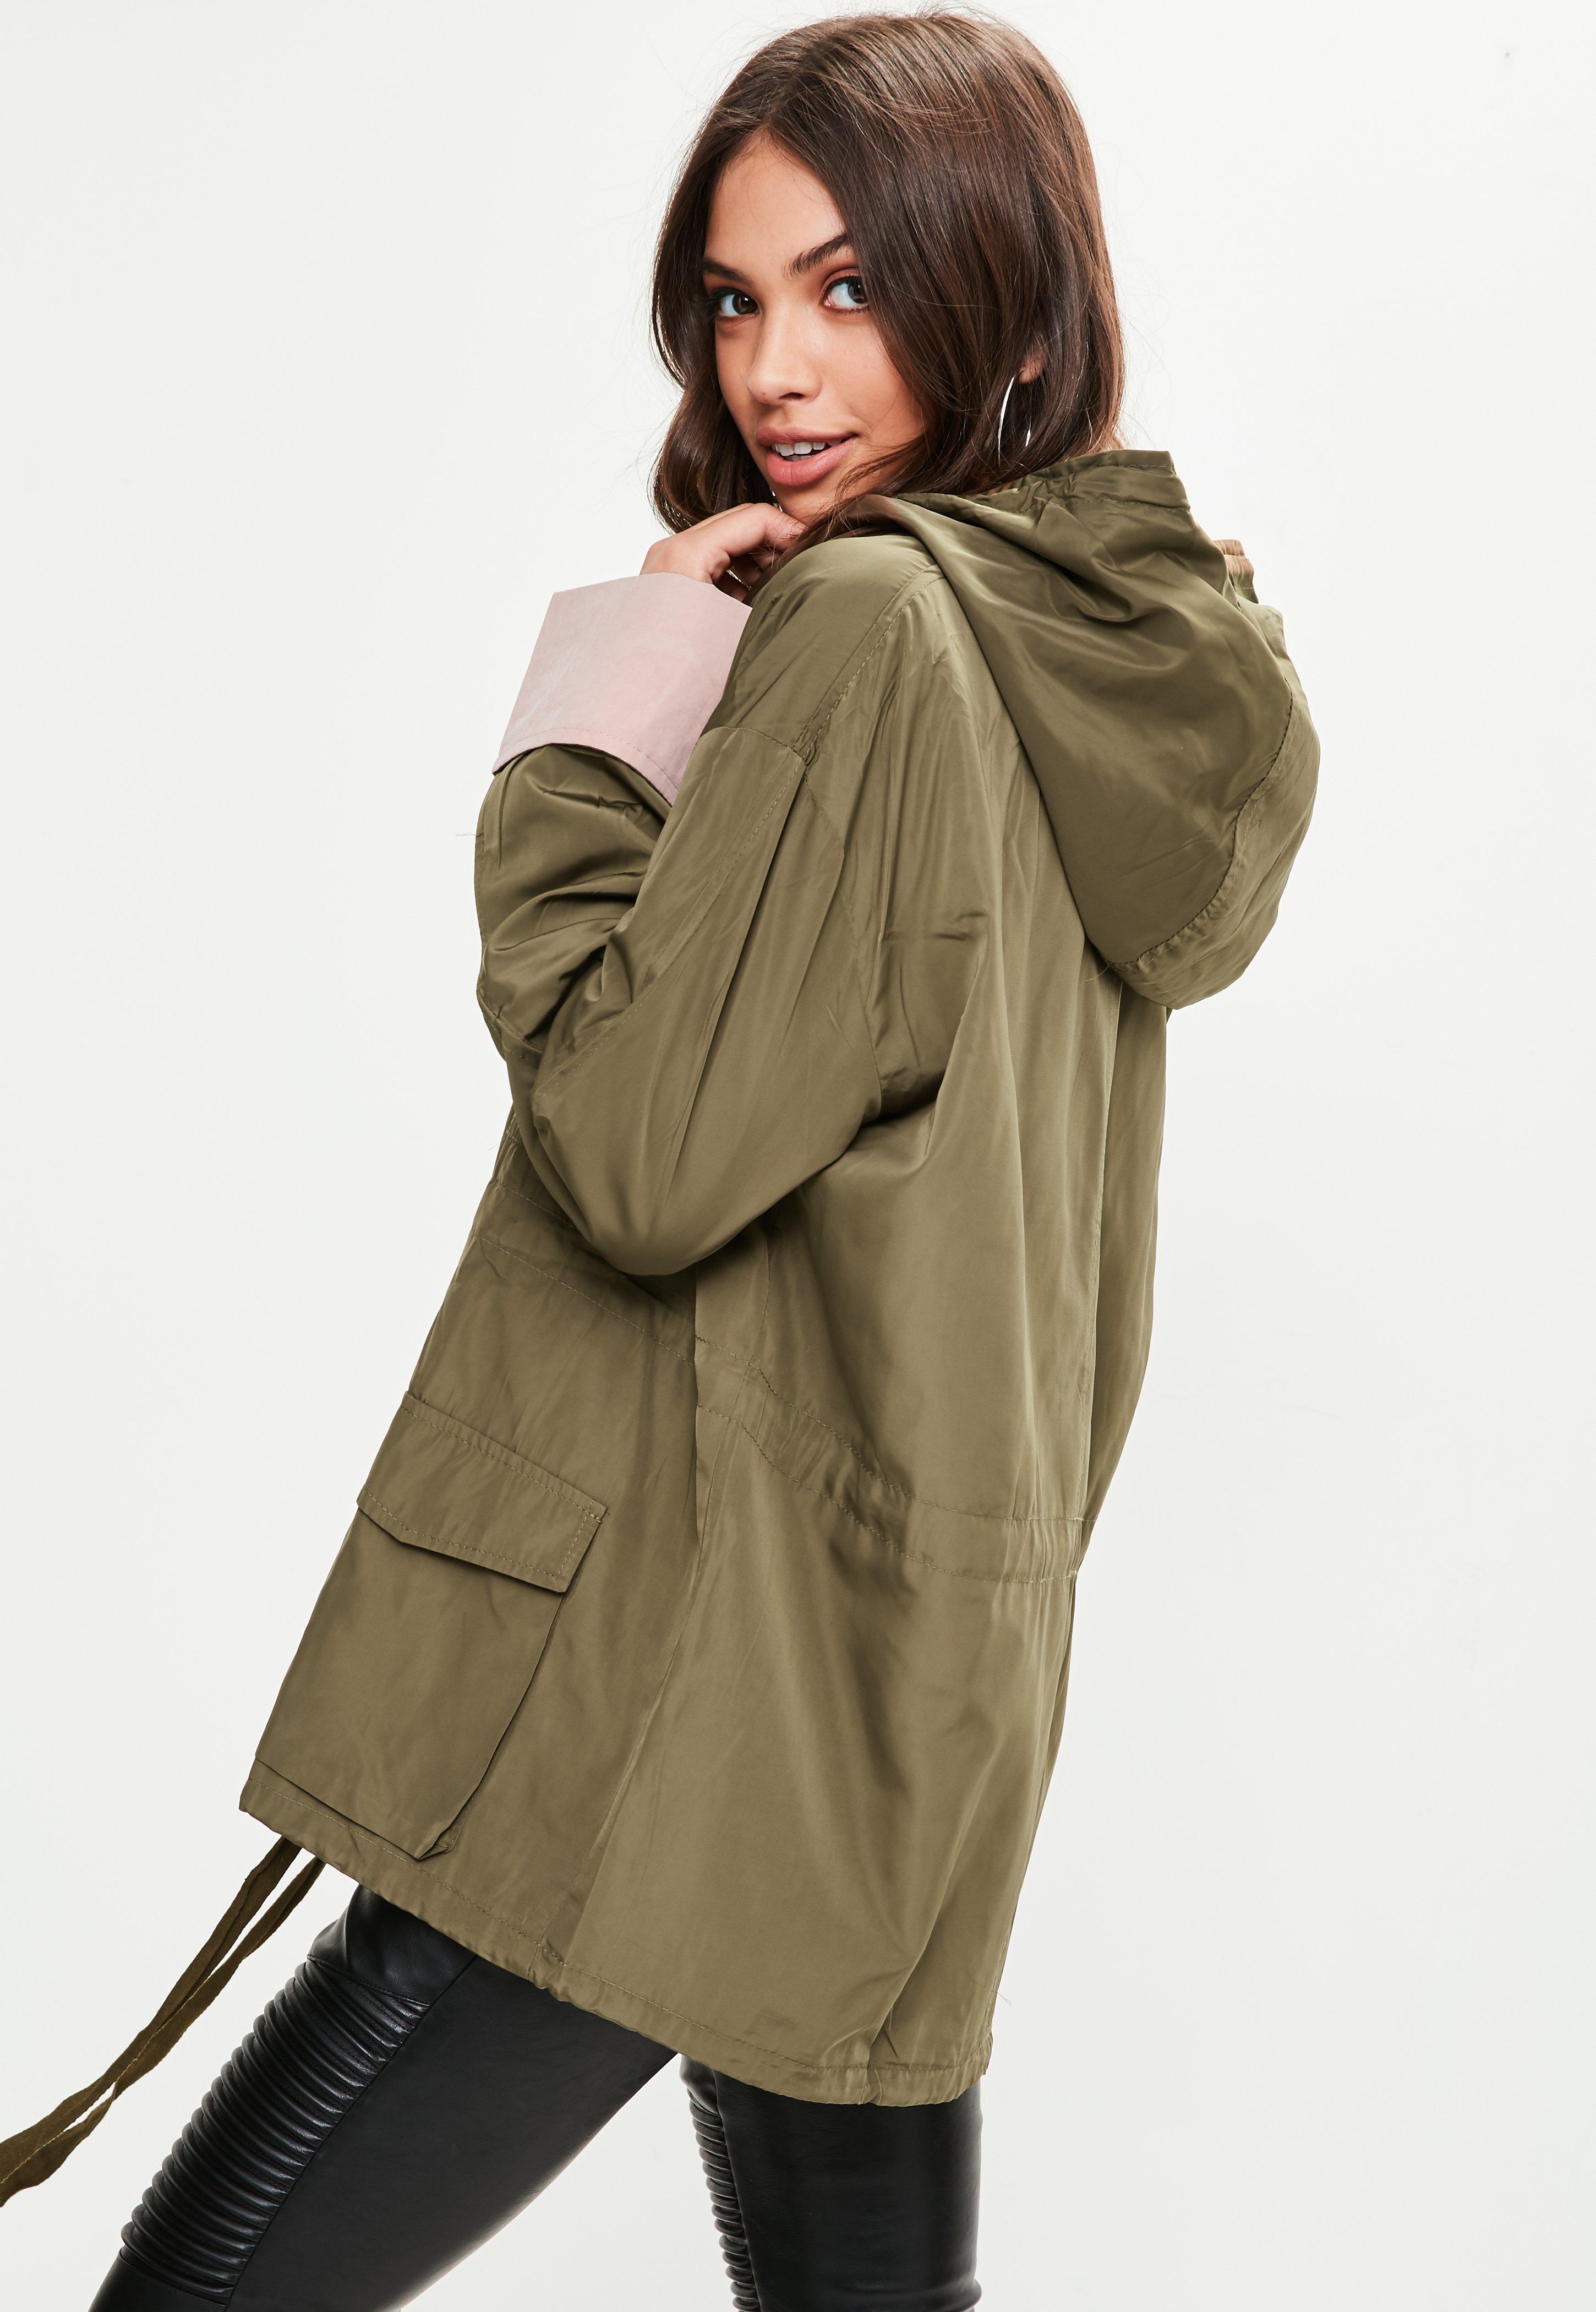 Lyst - Missguided Khaki Lightweight Parka in Natural